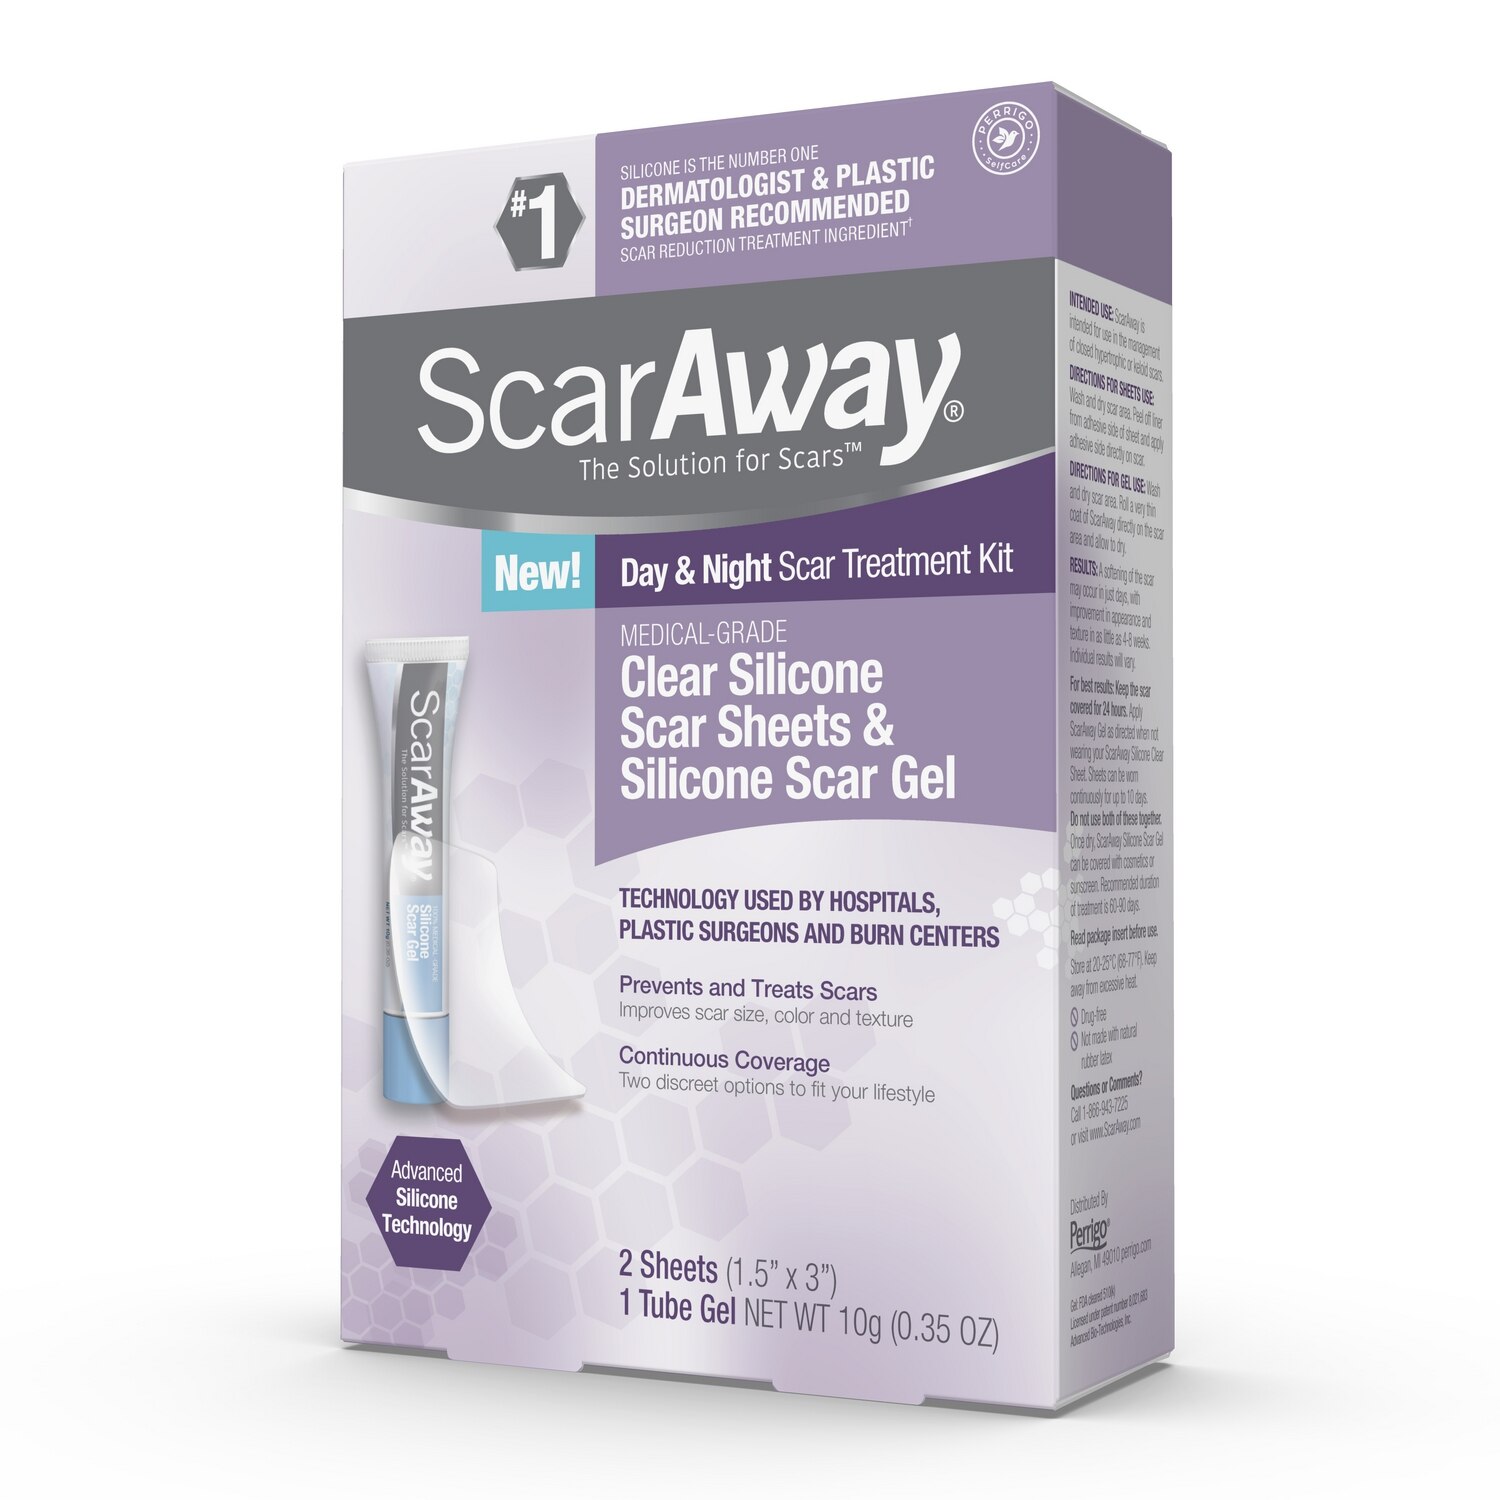 ScarAway Complete Scar Treatment Kit 0.35oz Gel + Sheets